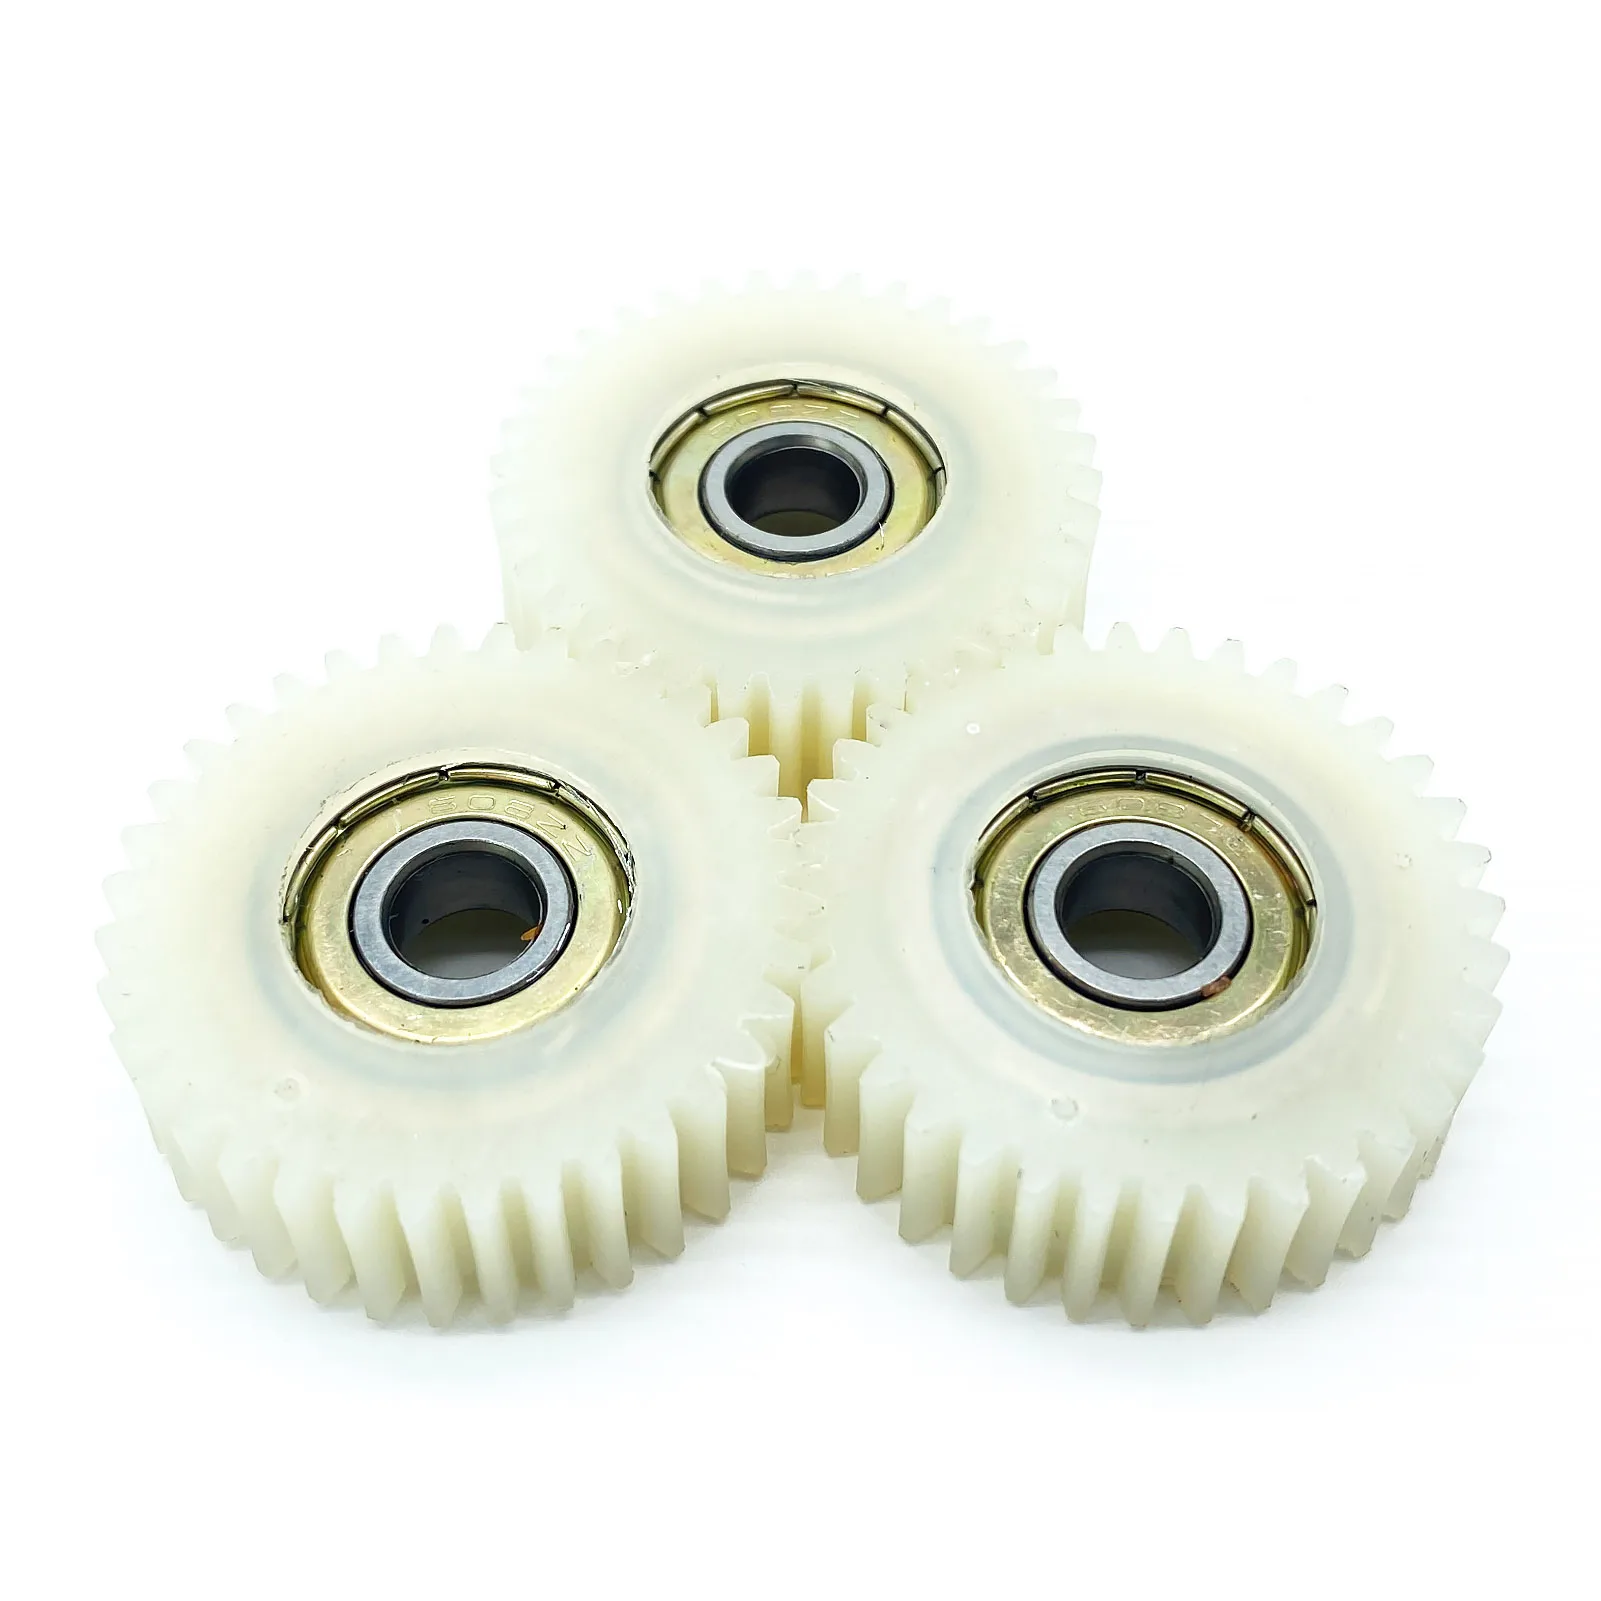 3pcs 36 Teeth 38mm Nylon electronic motor gear 608Z ball bearing gears for Befang and Other electrical bike bicycle tricycle